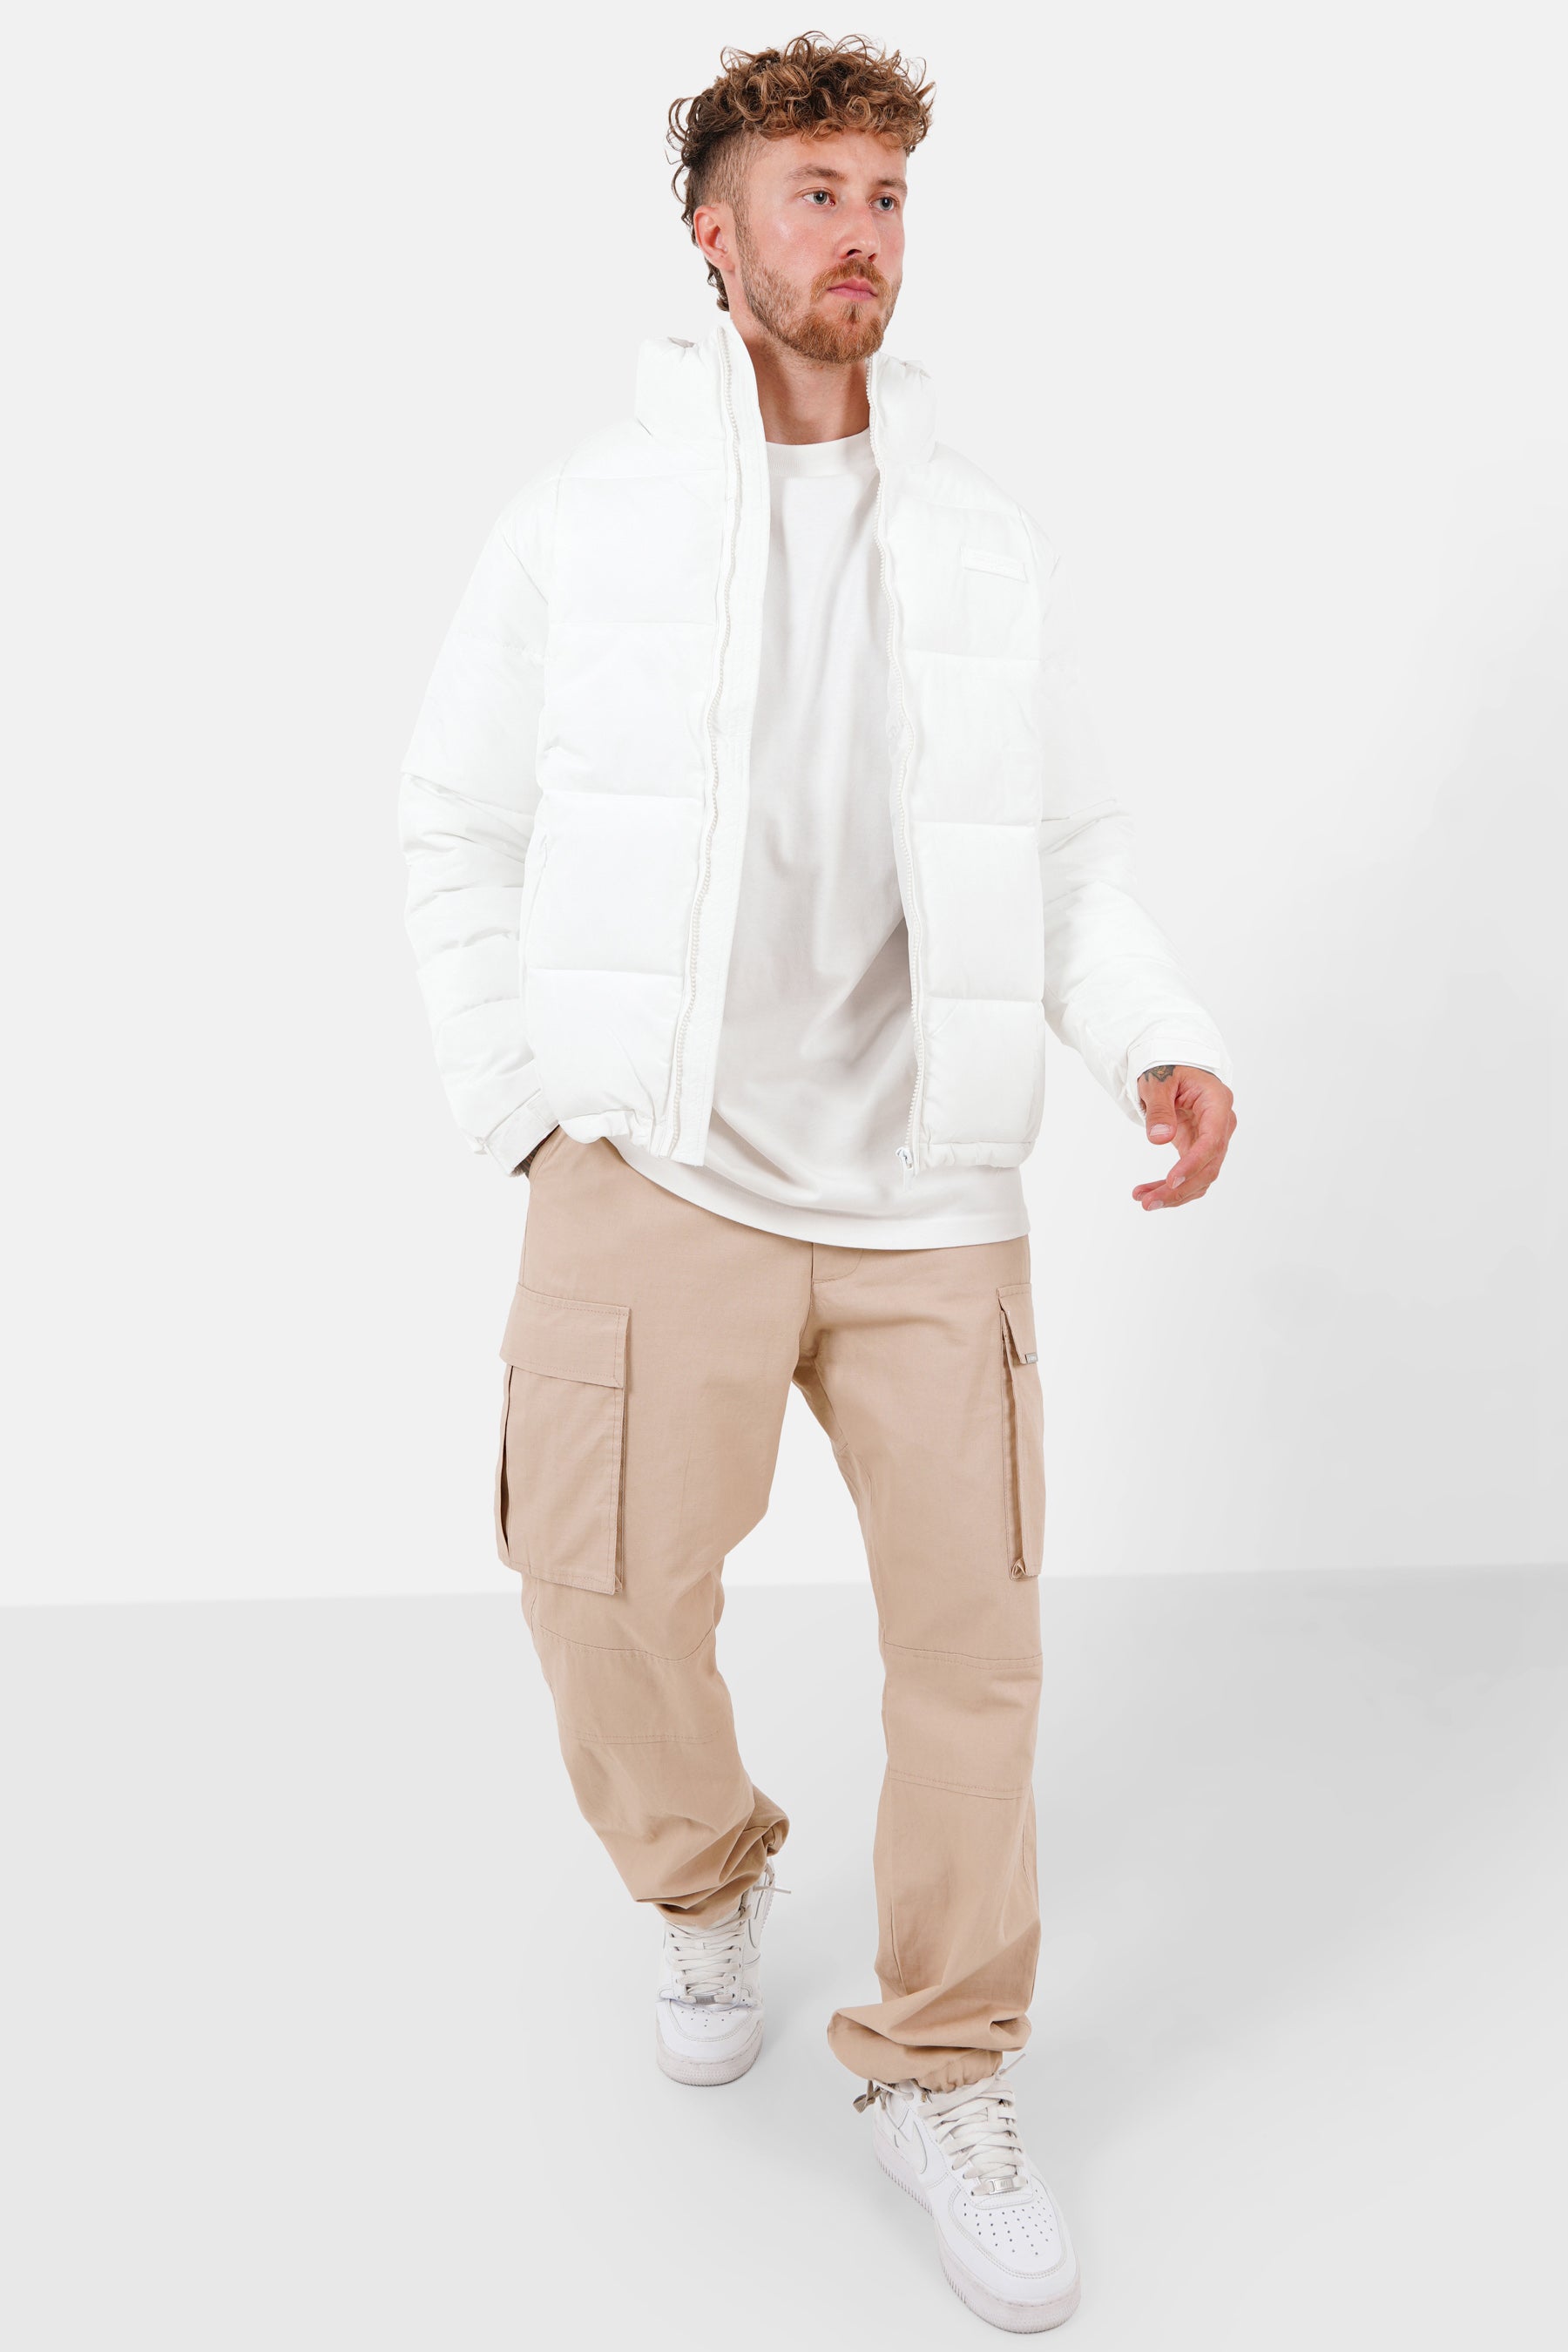 Square quilted puffer White